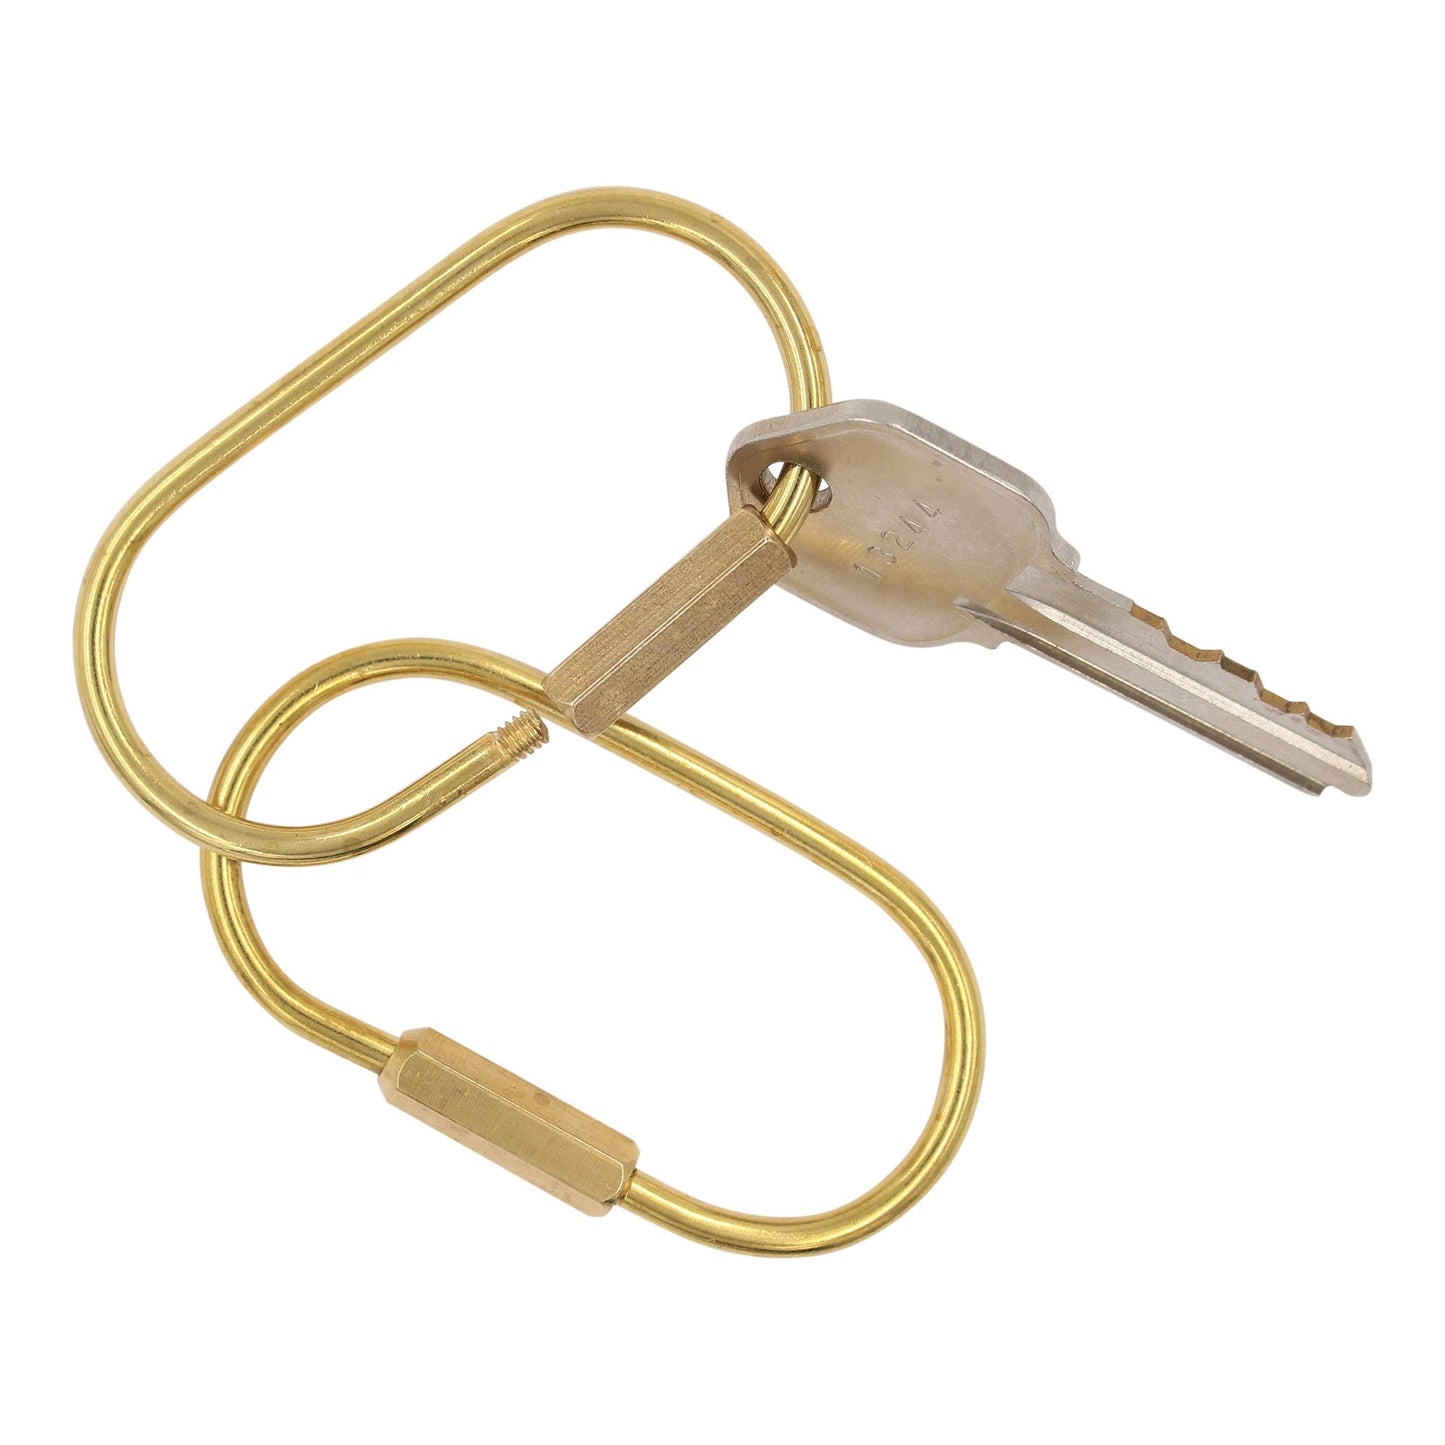 Brass Oval Keyring With Screw Closure